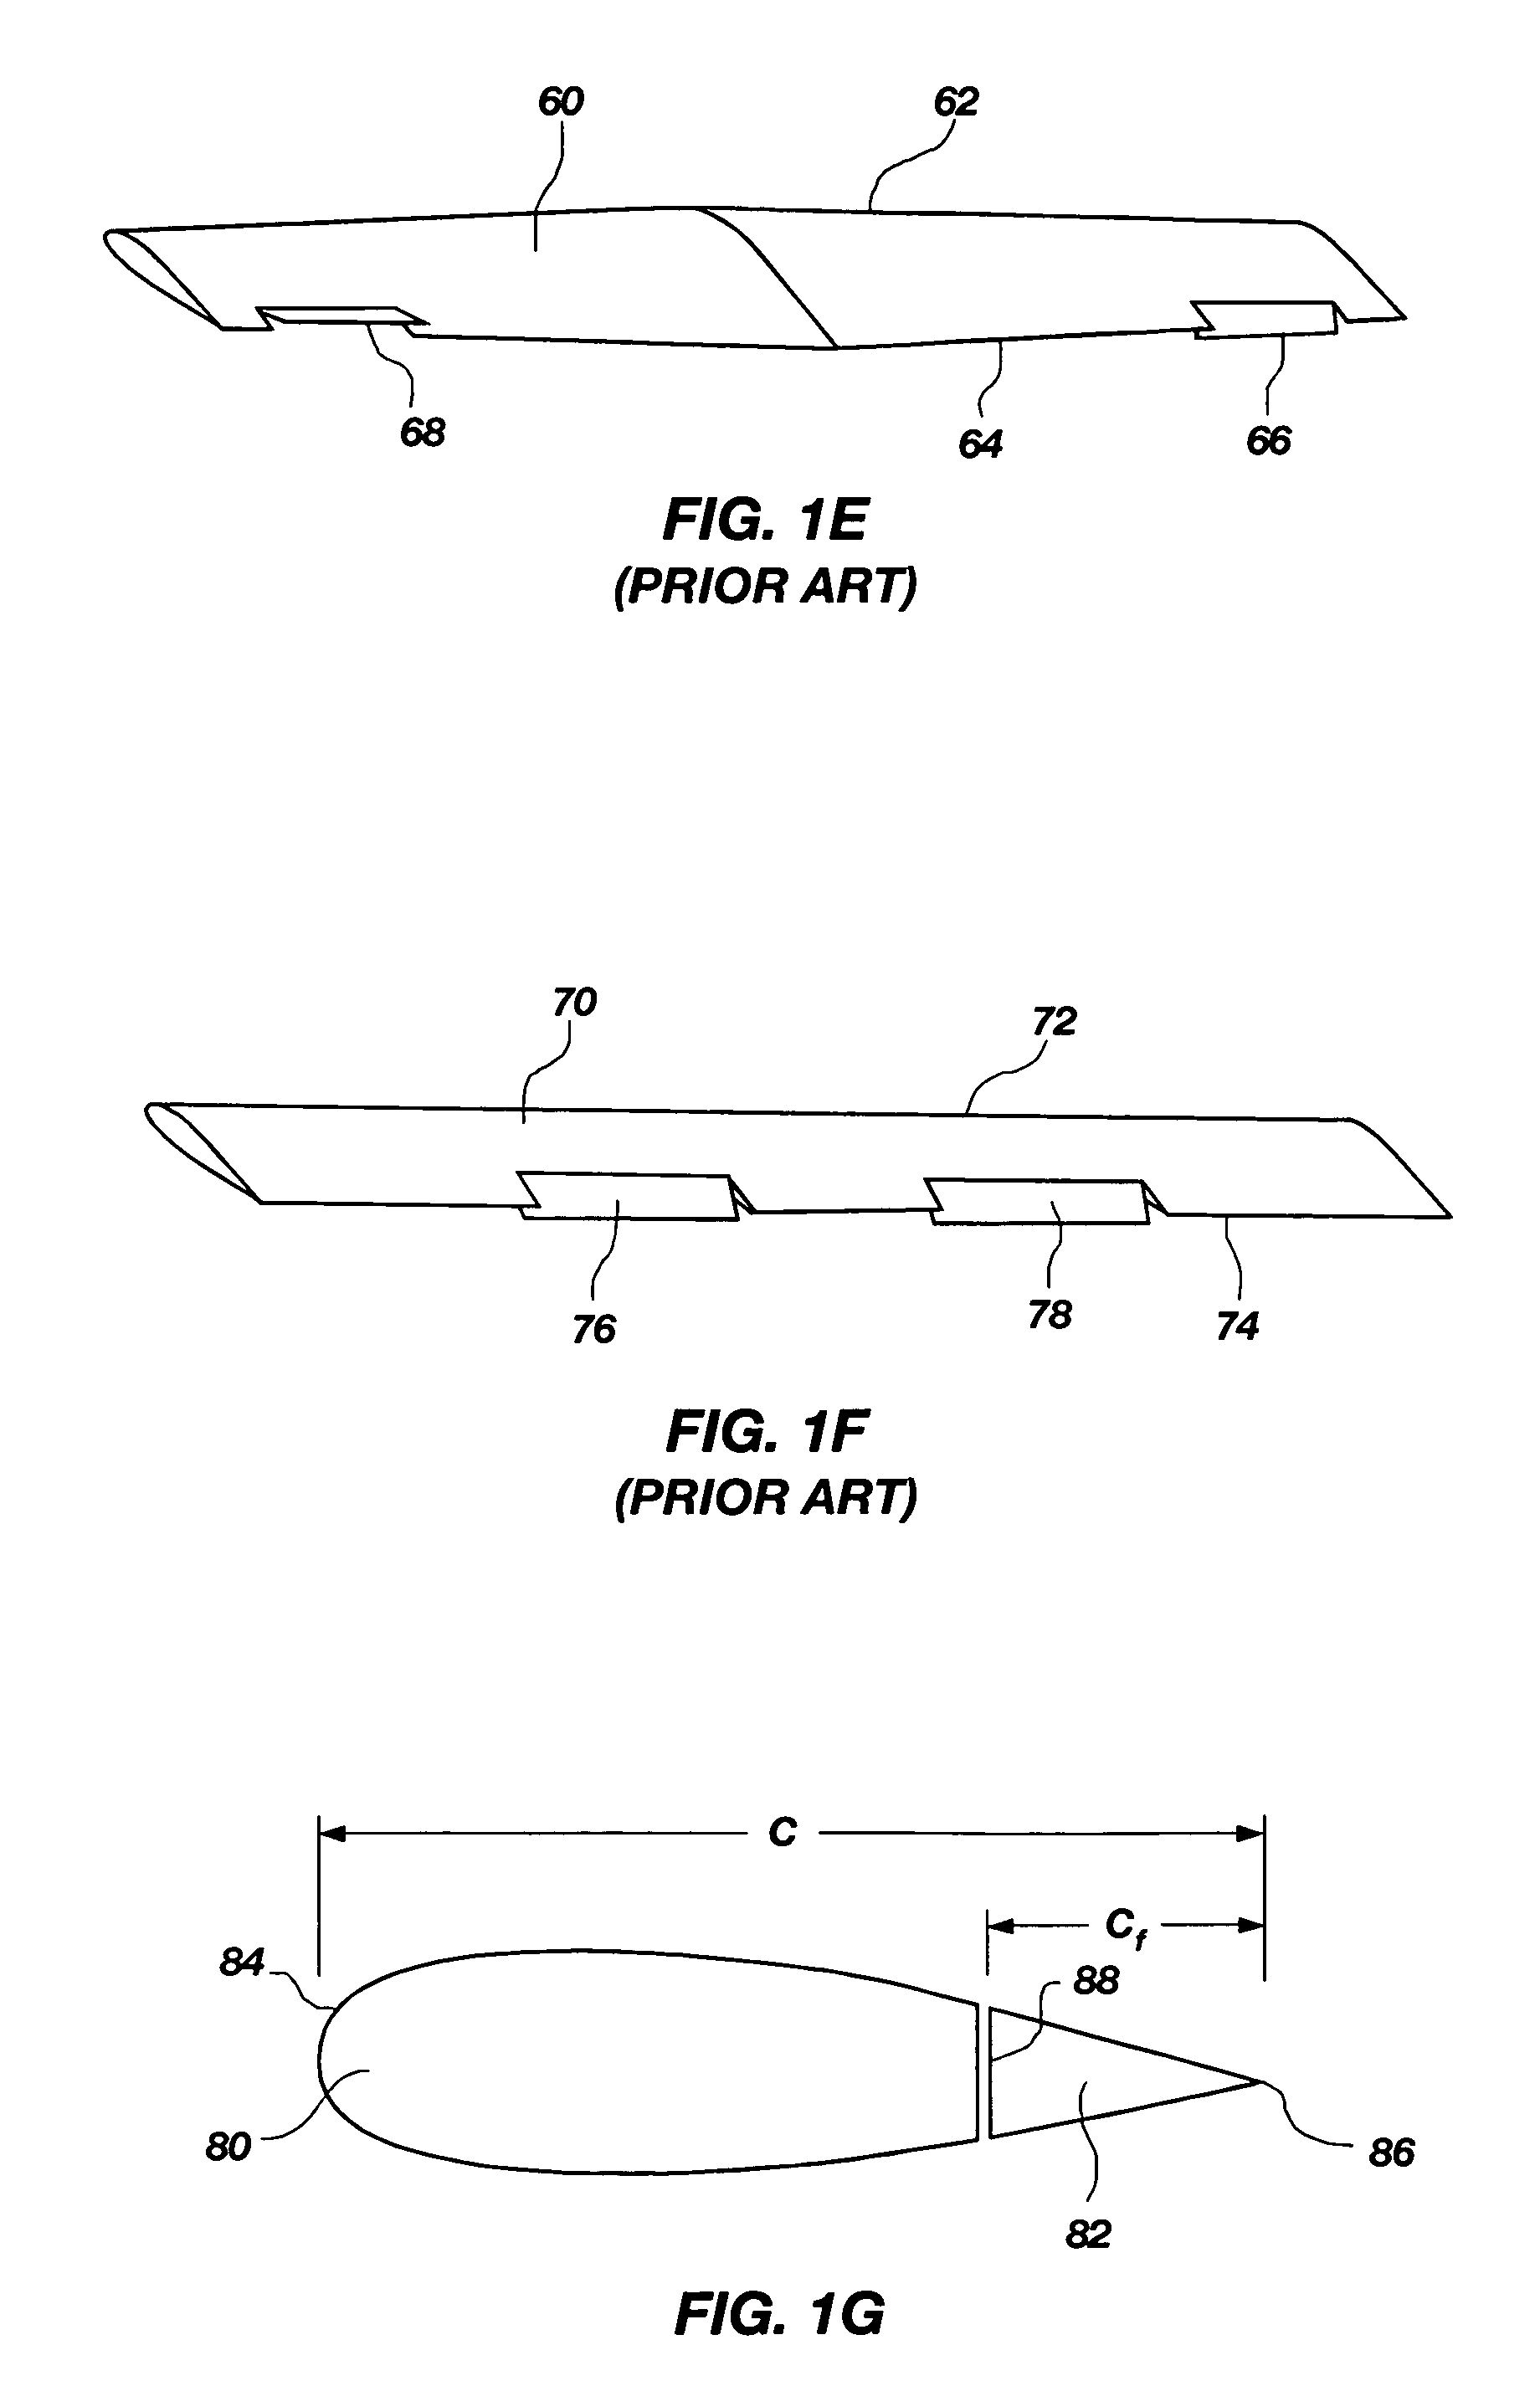 Apparatus and method for reducing induced drag on aircraft and other vehicles